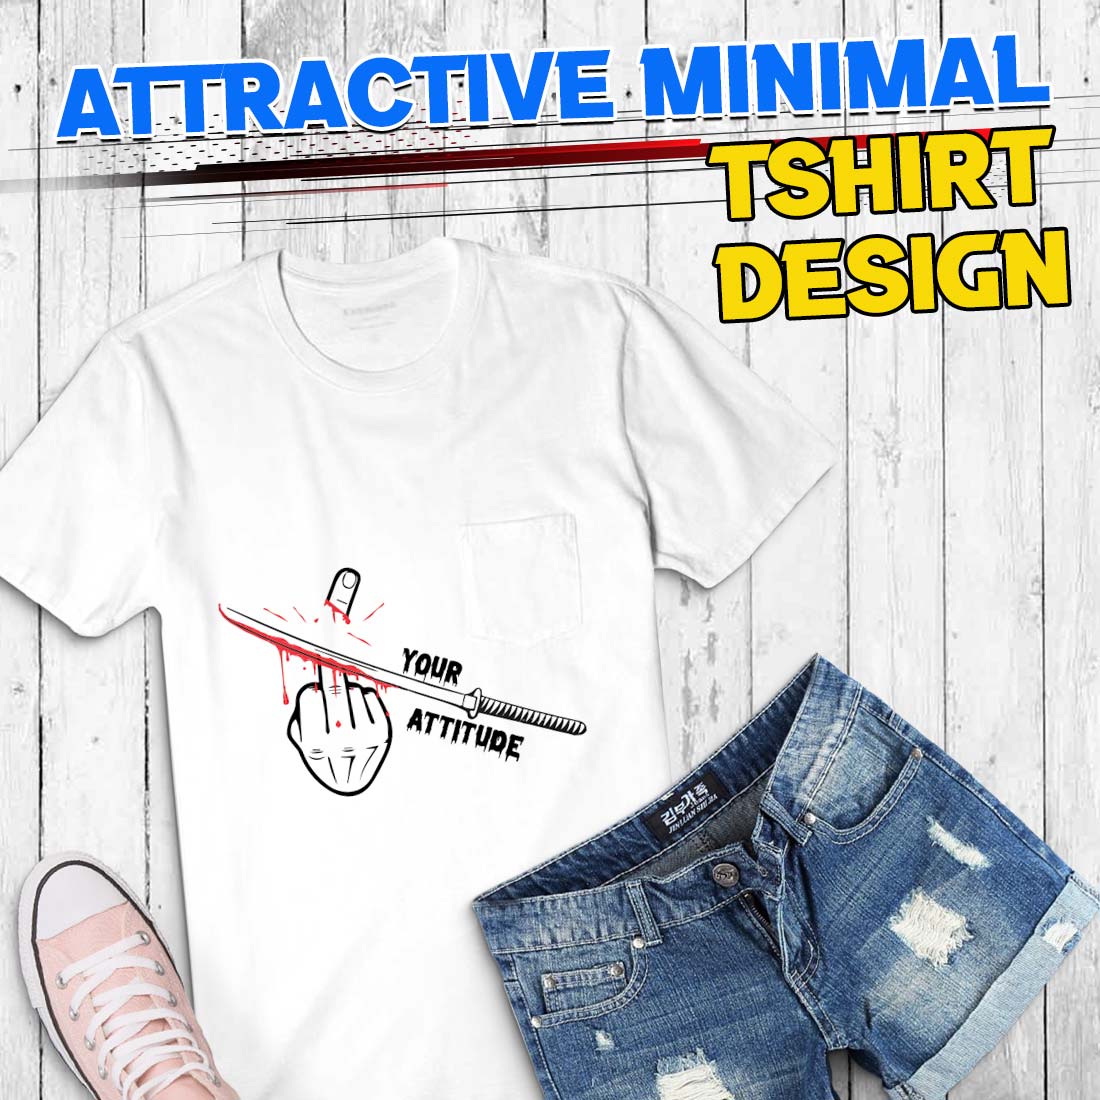 Attractive Minimal T-shirt Design cover image.